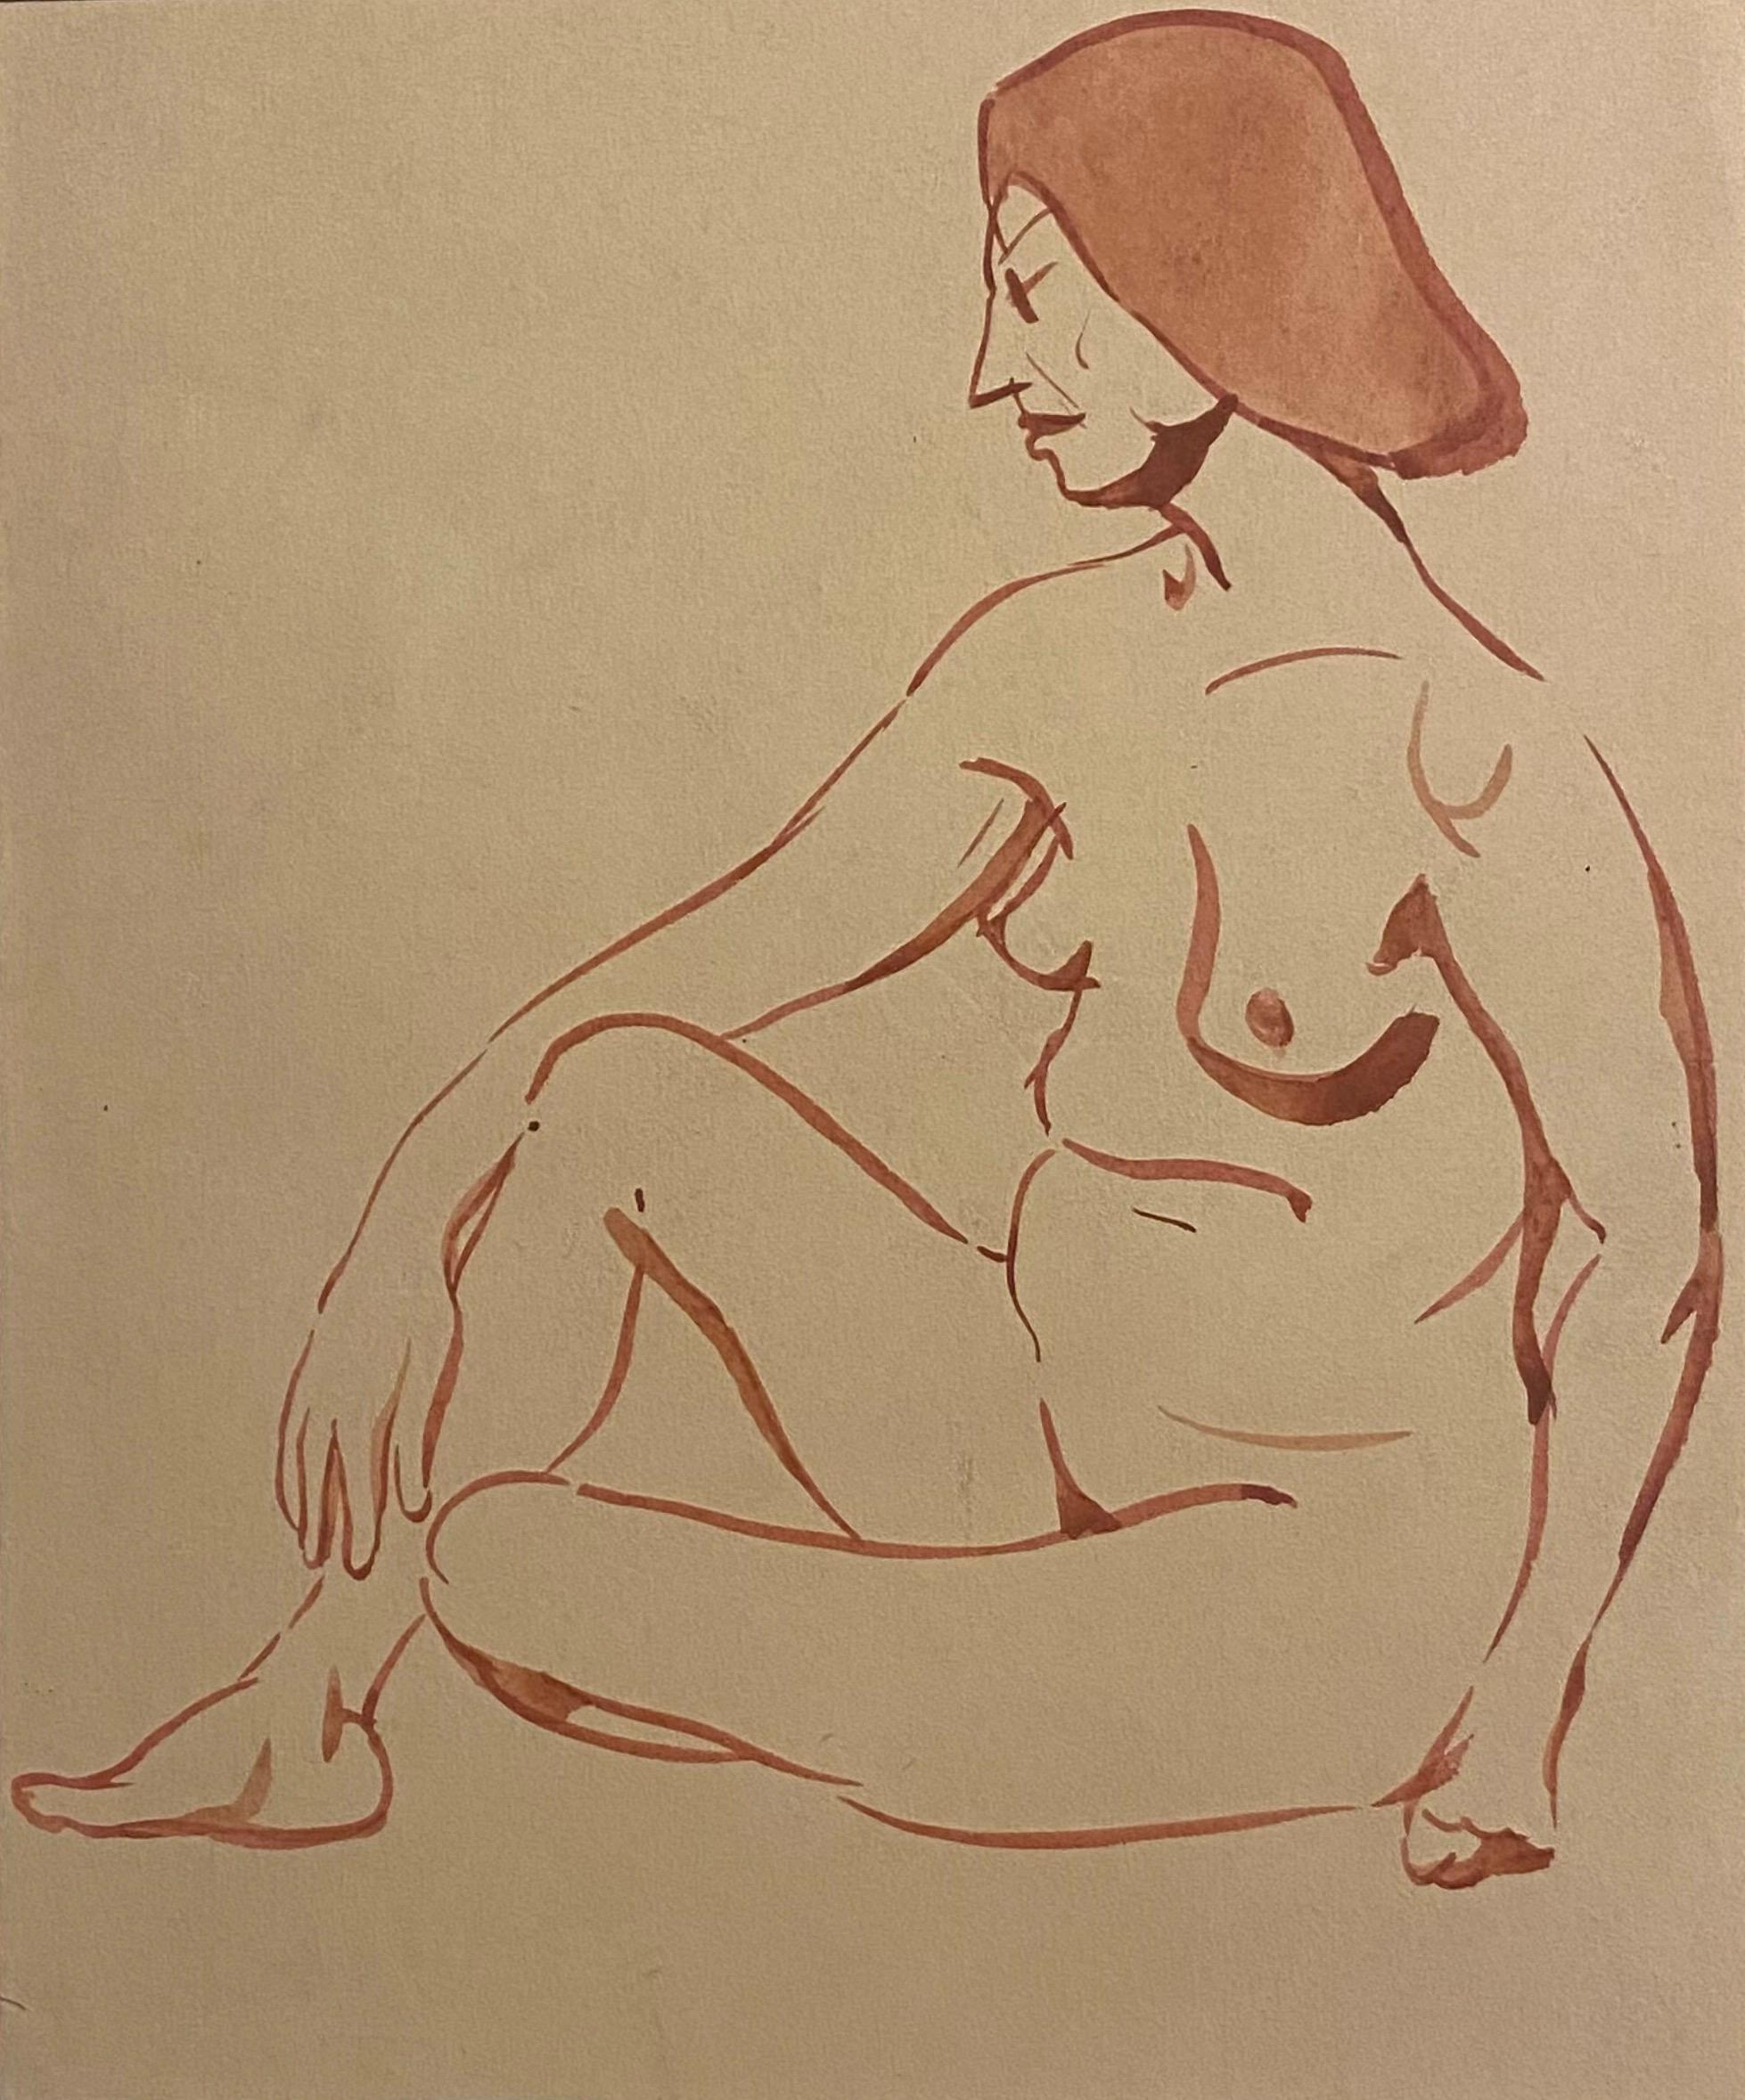 "Nude" is an original drawing in sanguine and watercolor on paper, realized by Jean Delpech (1916-1988). 

The state of preservation of the artwork is very good.

Included Passaport.

The artwork represents a beautiful figure of a nude